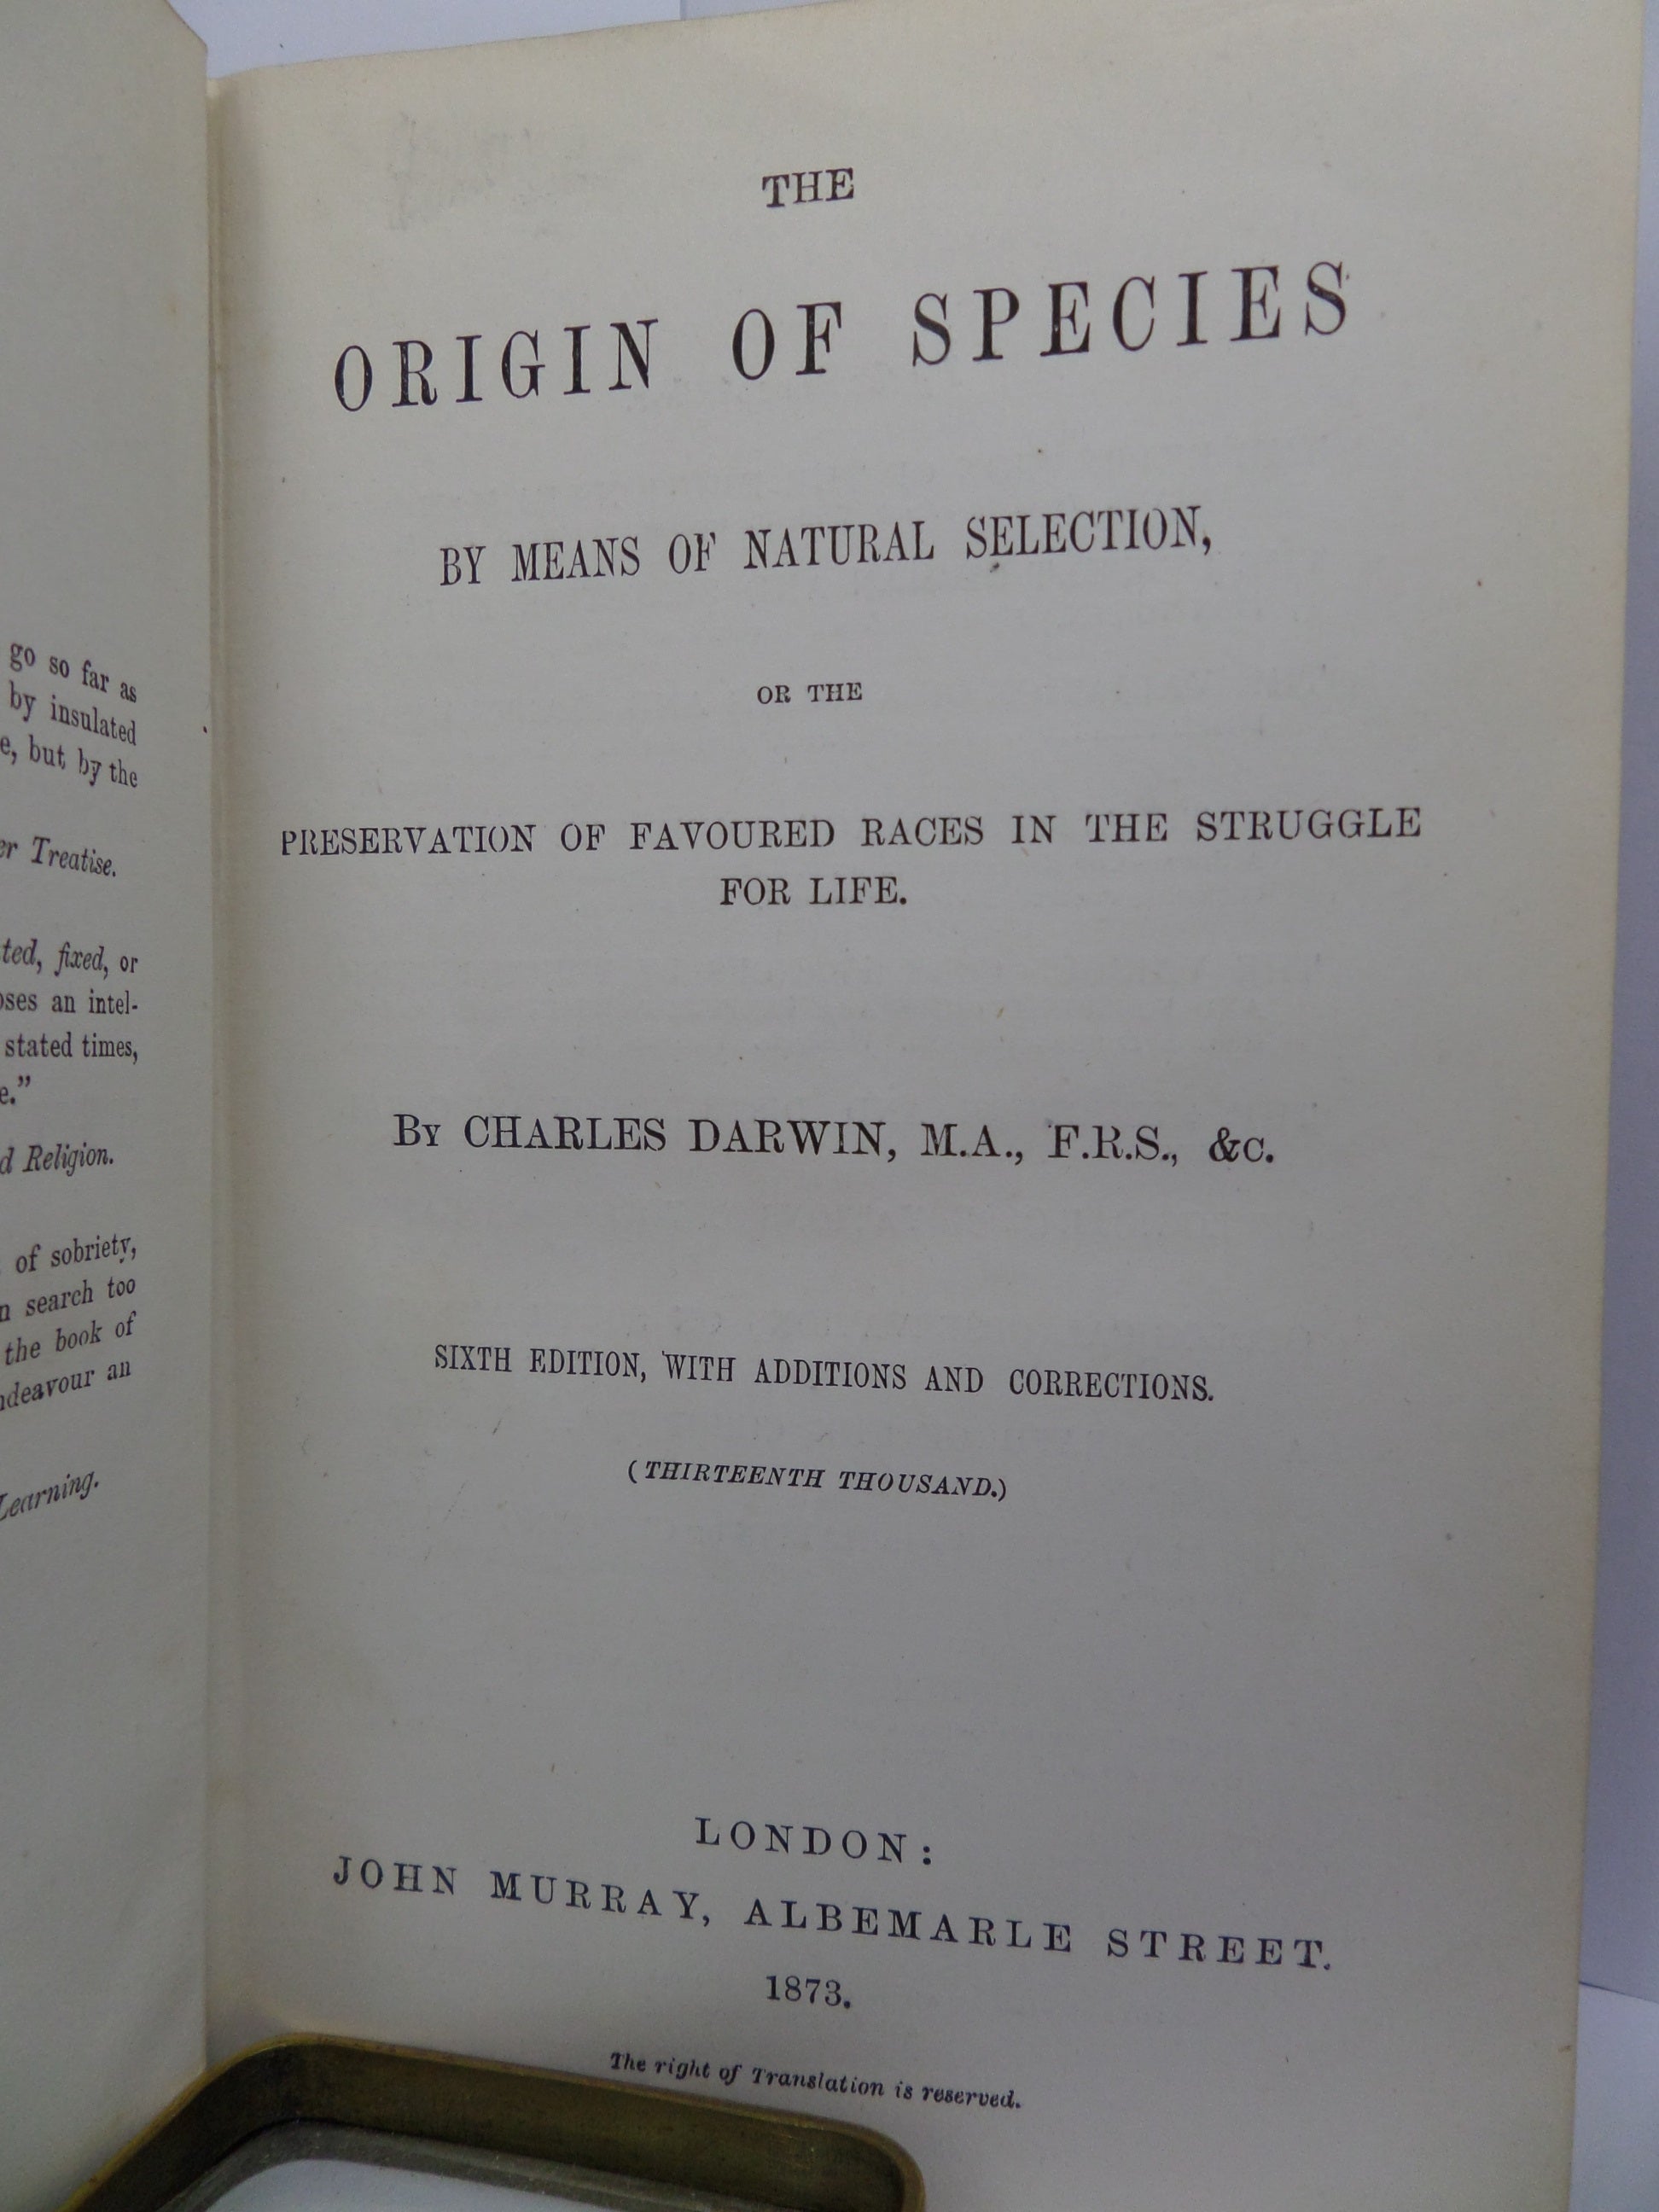 THE ORIGIN OF SPECIES BY MEANS OF NATURAL SELECTION BY CHARLES DARWIN 1873